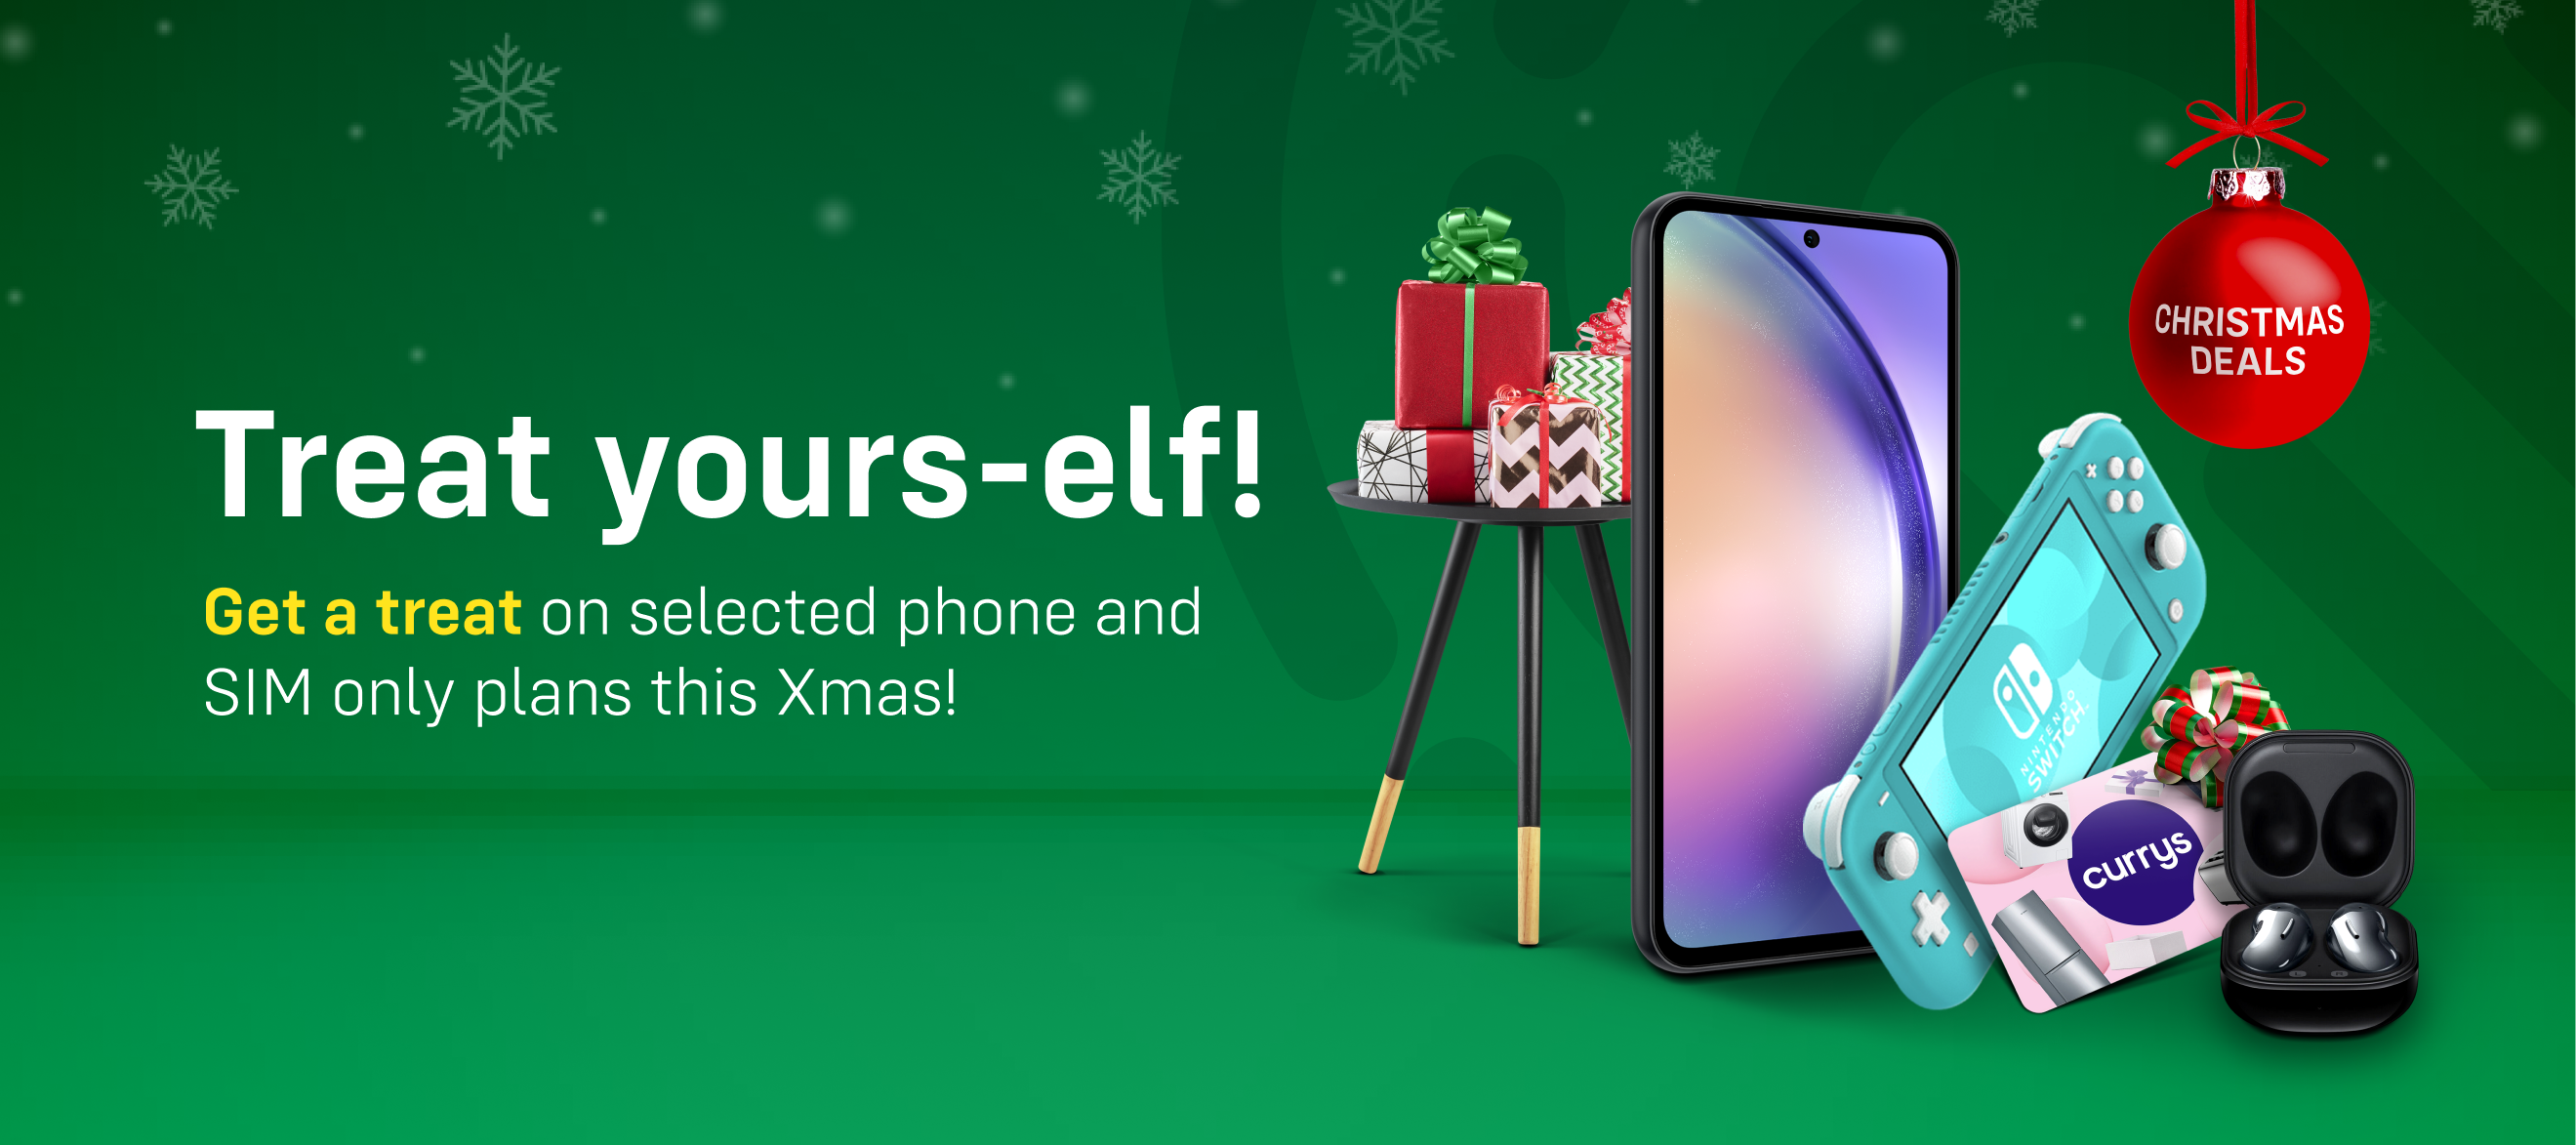 iD Christmas Deals are here!